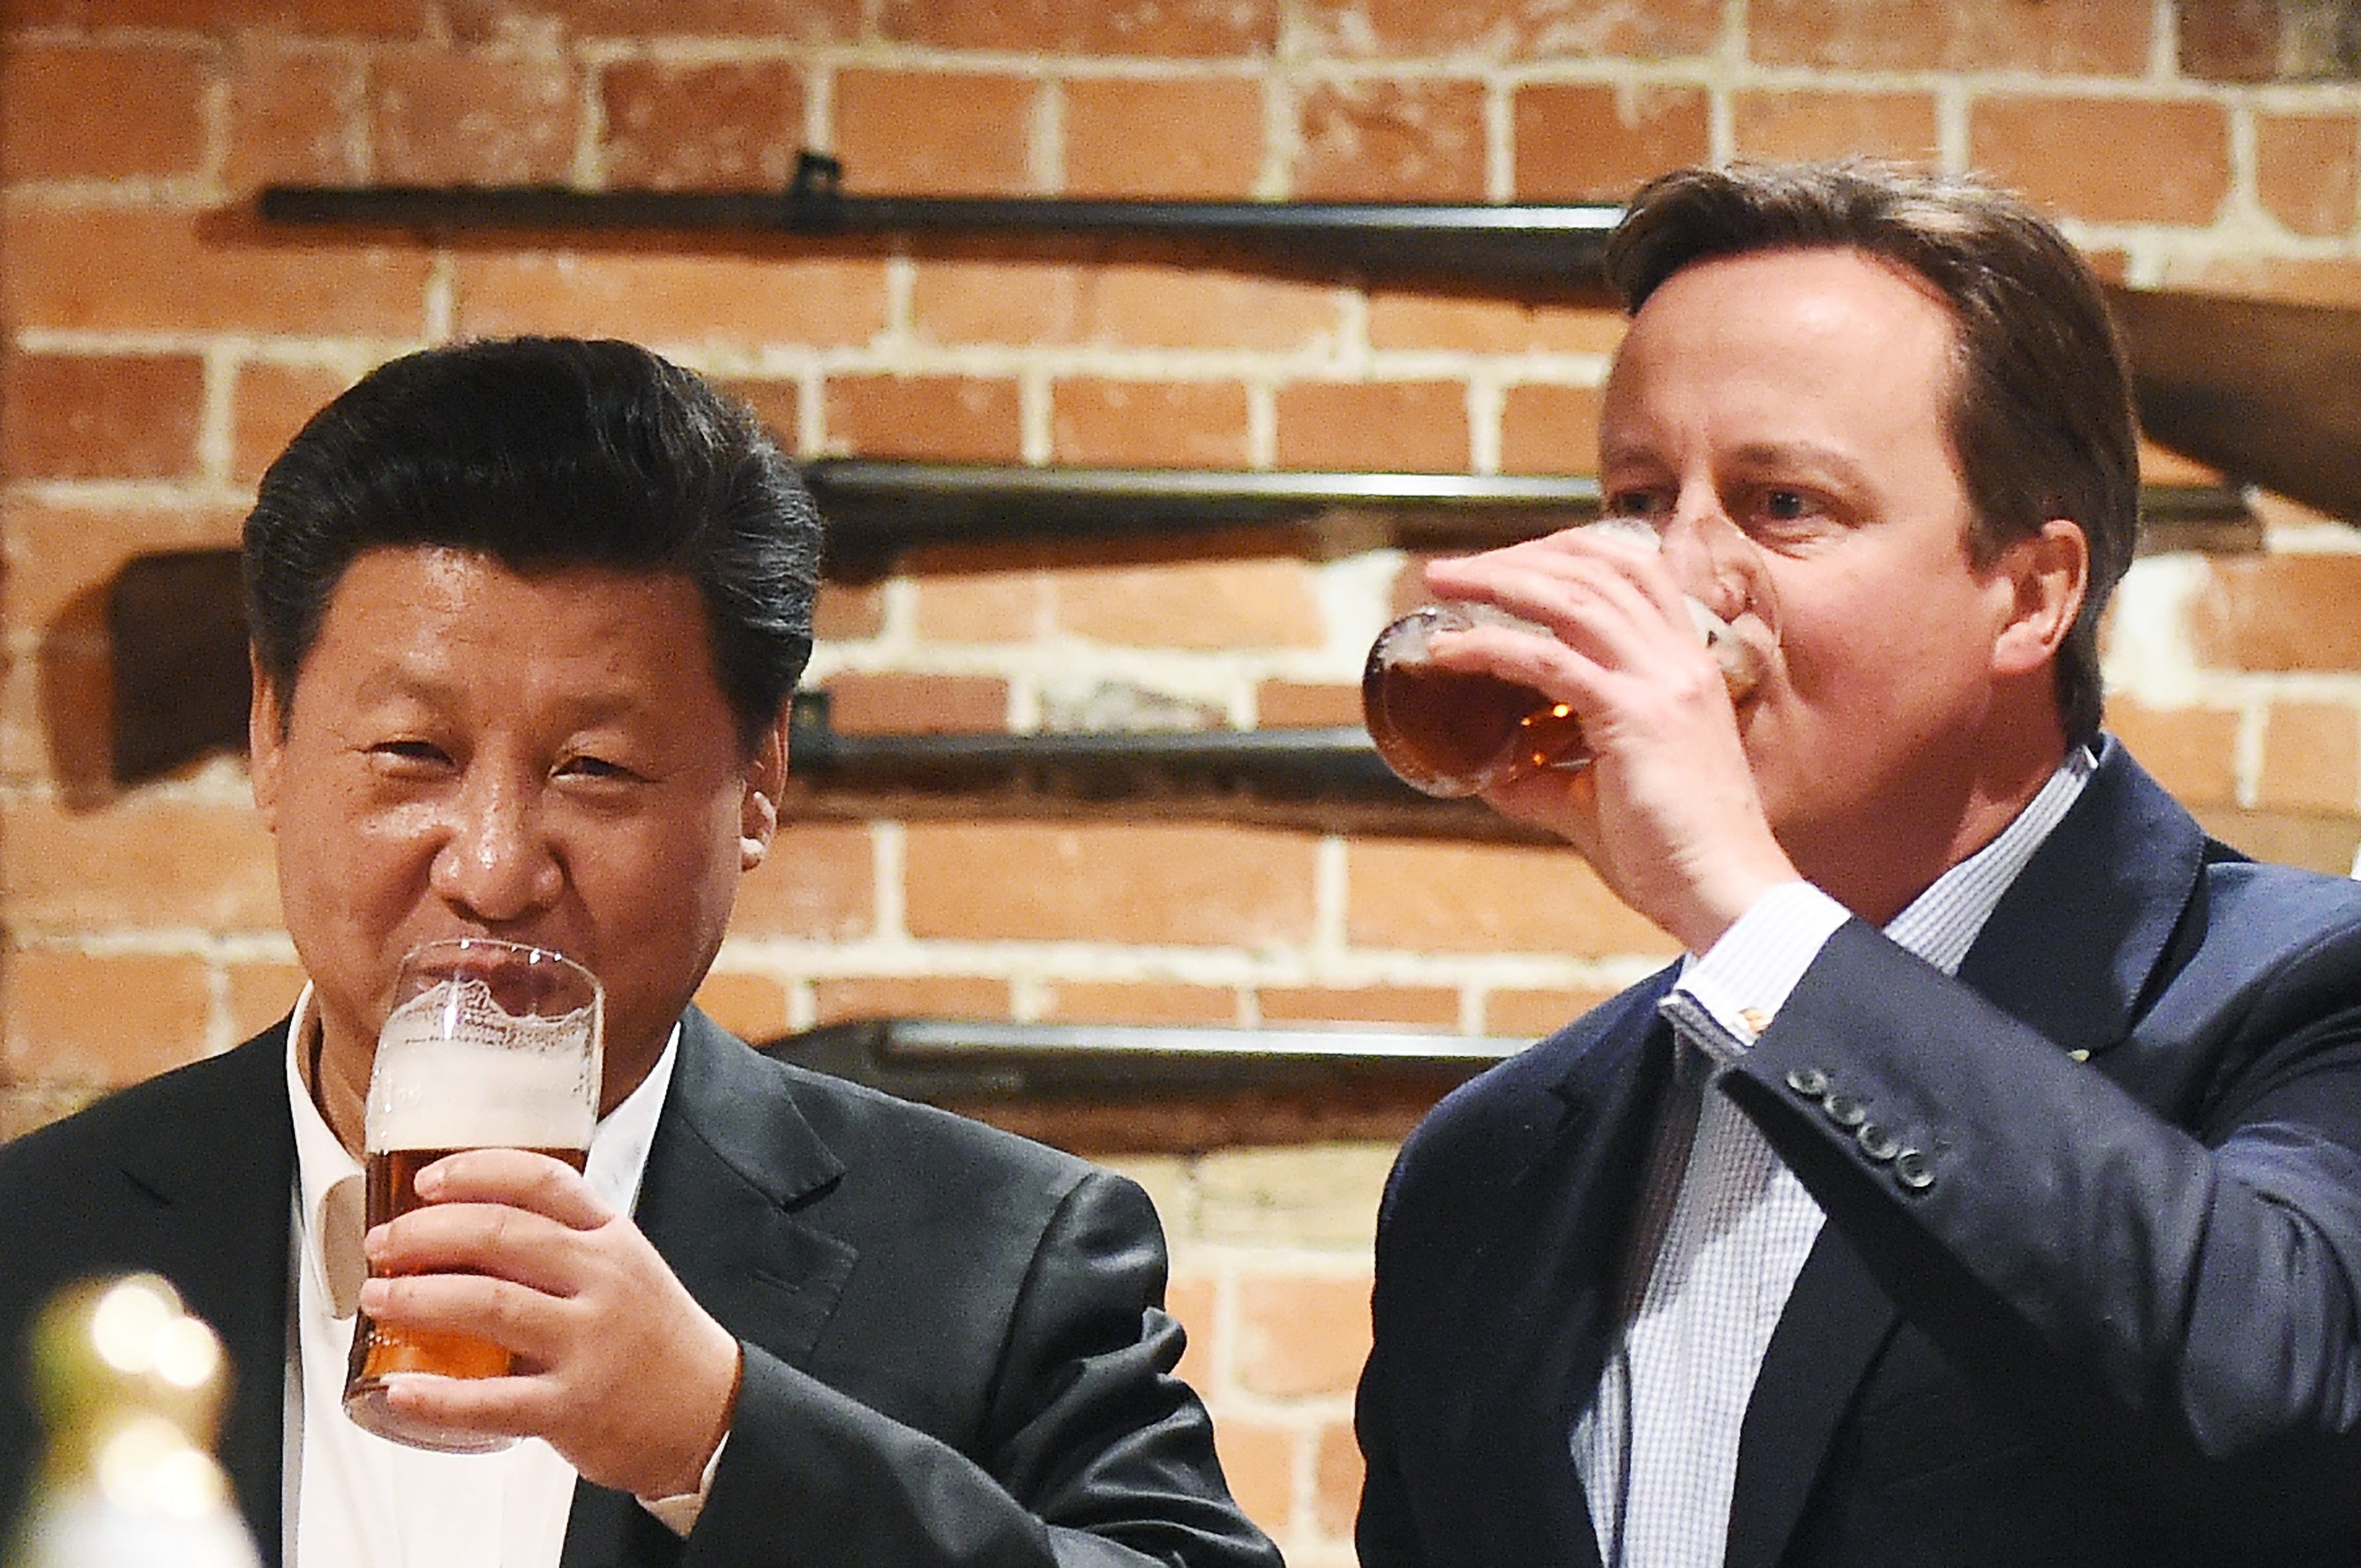 British Prime Minister David Cameron shares a pint with Chinese President Xi Jinping during Xi’s visit to the UK in 2015. Plans for Donald Trump’s upcoming visit to the UK have brought up nasty memories of crackdowns on anti-Xi protesters from around this time. Photo: pool via EPA